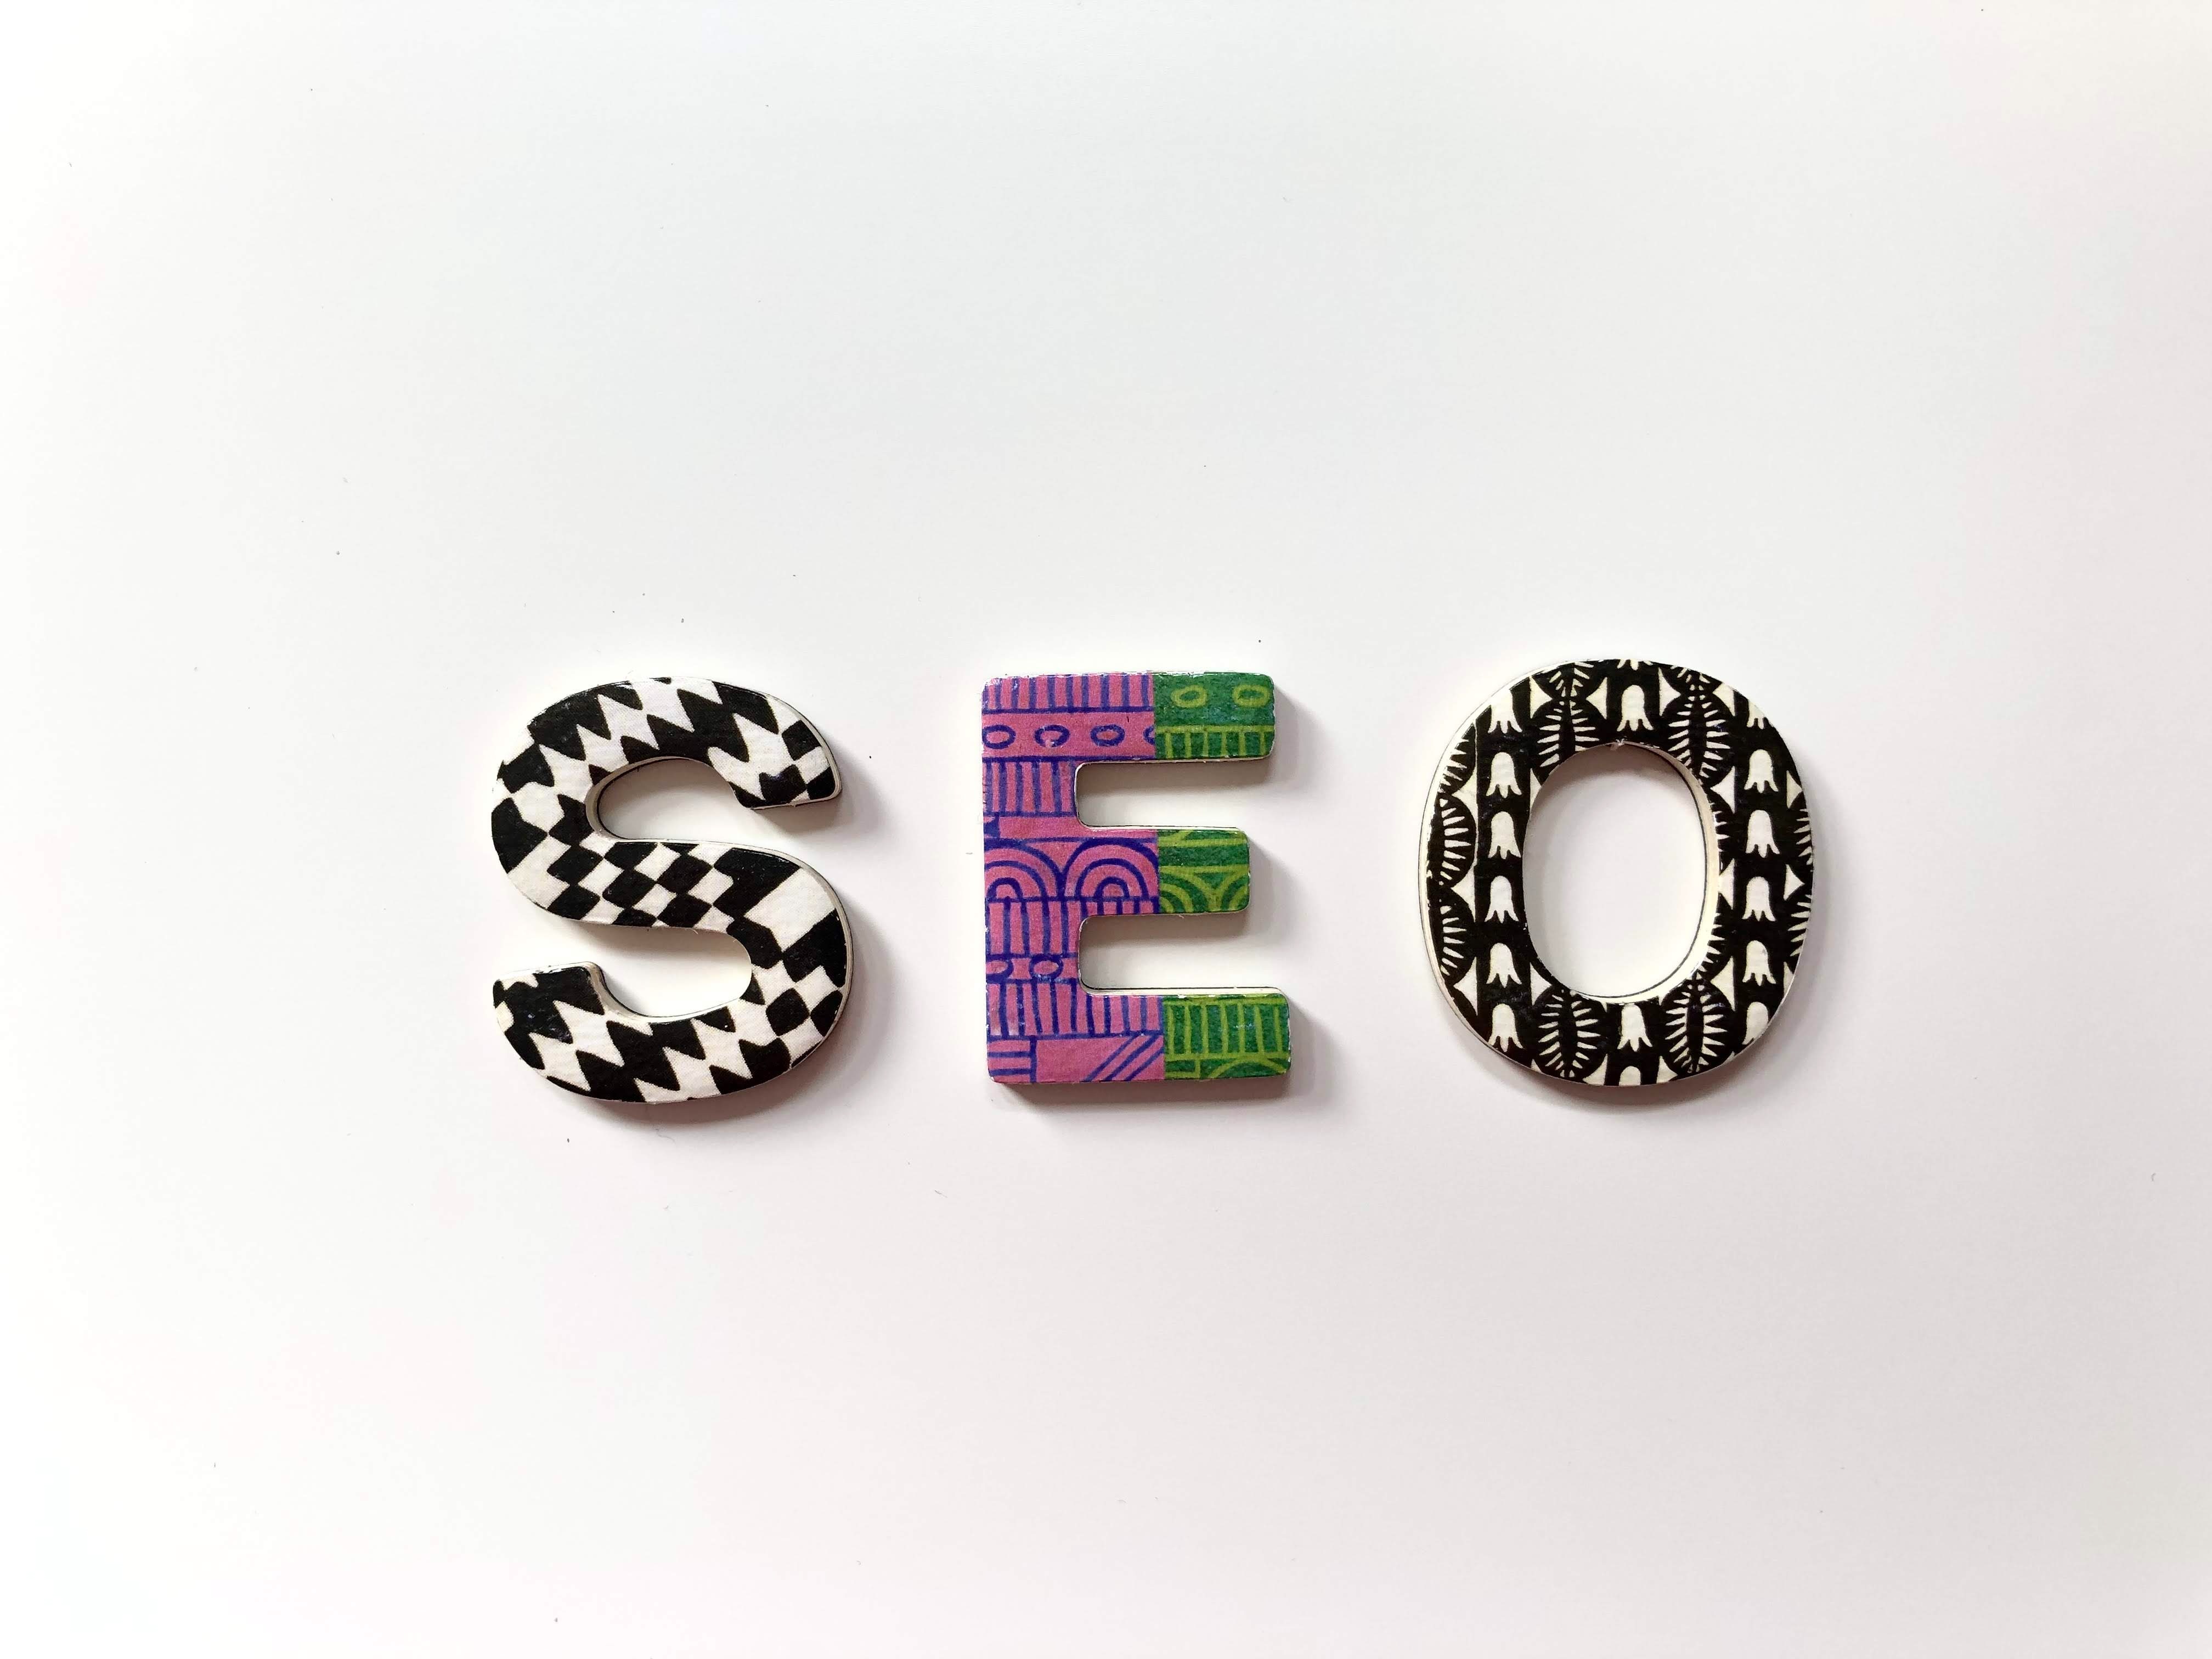 https://www.seo-design.fr/referencement-seo/agence-rennes/